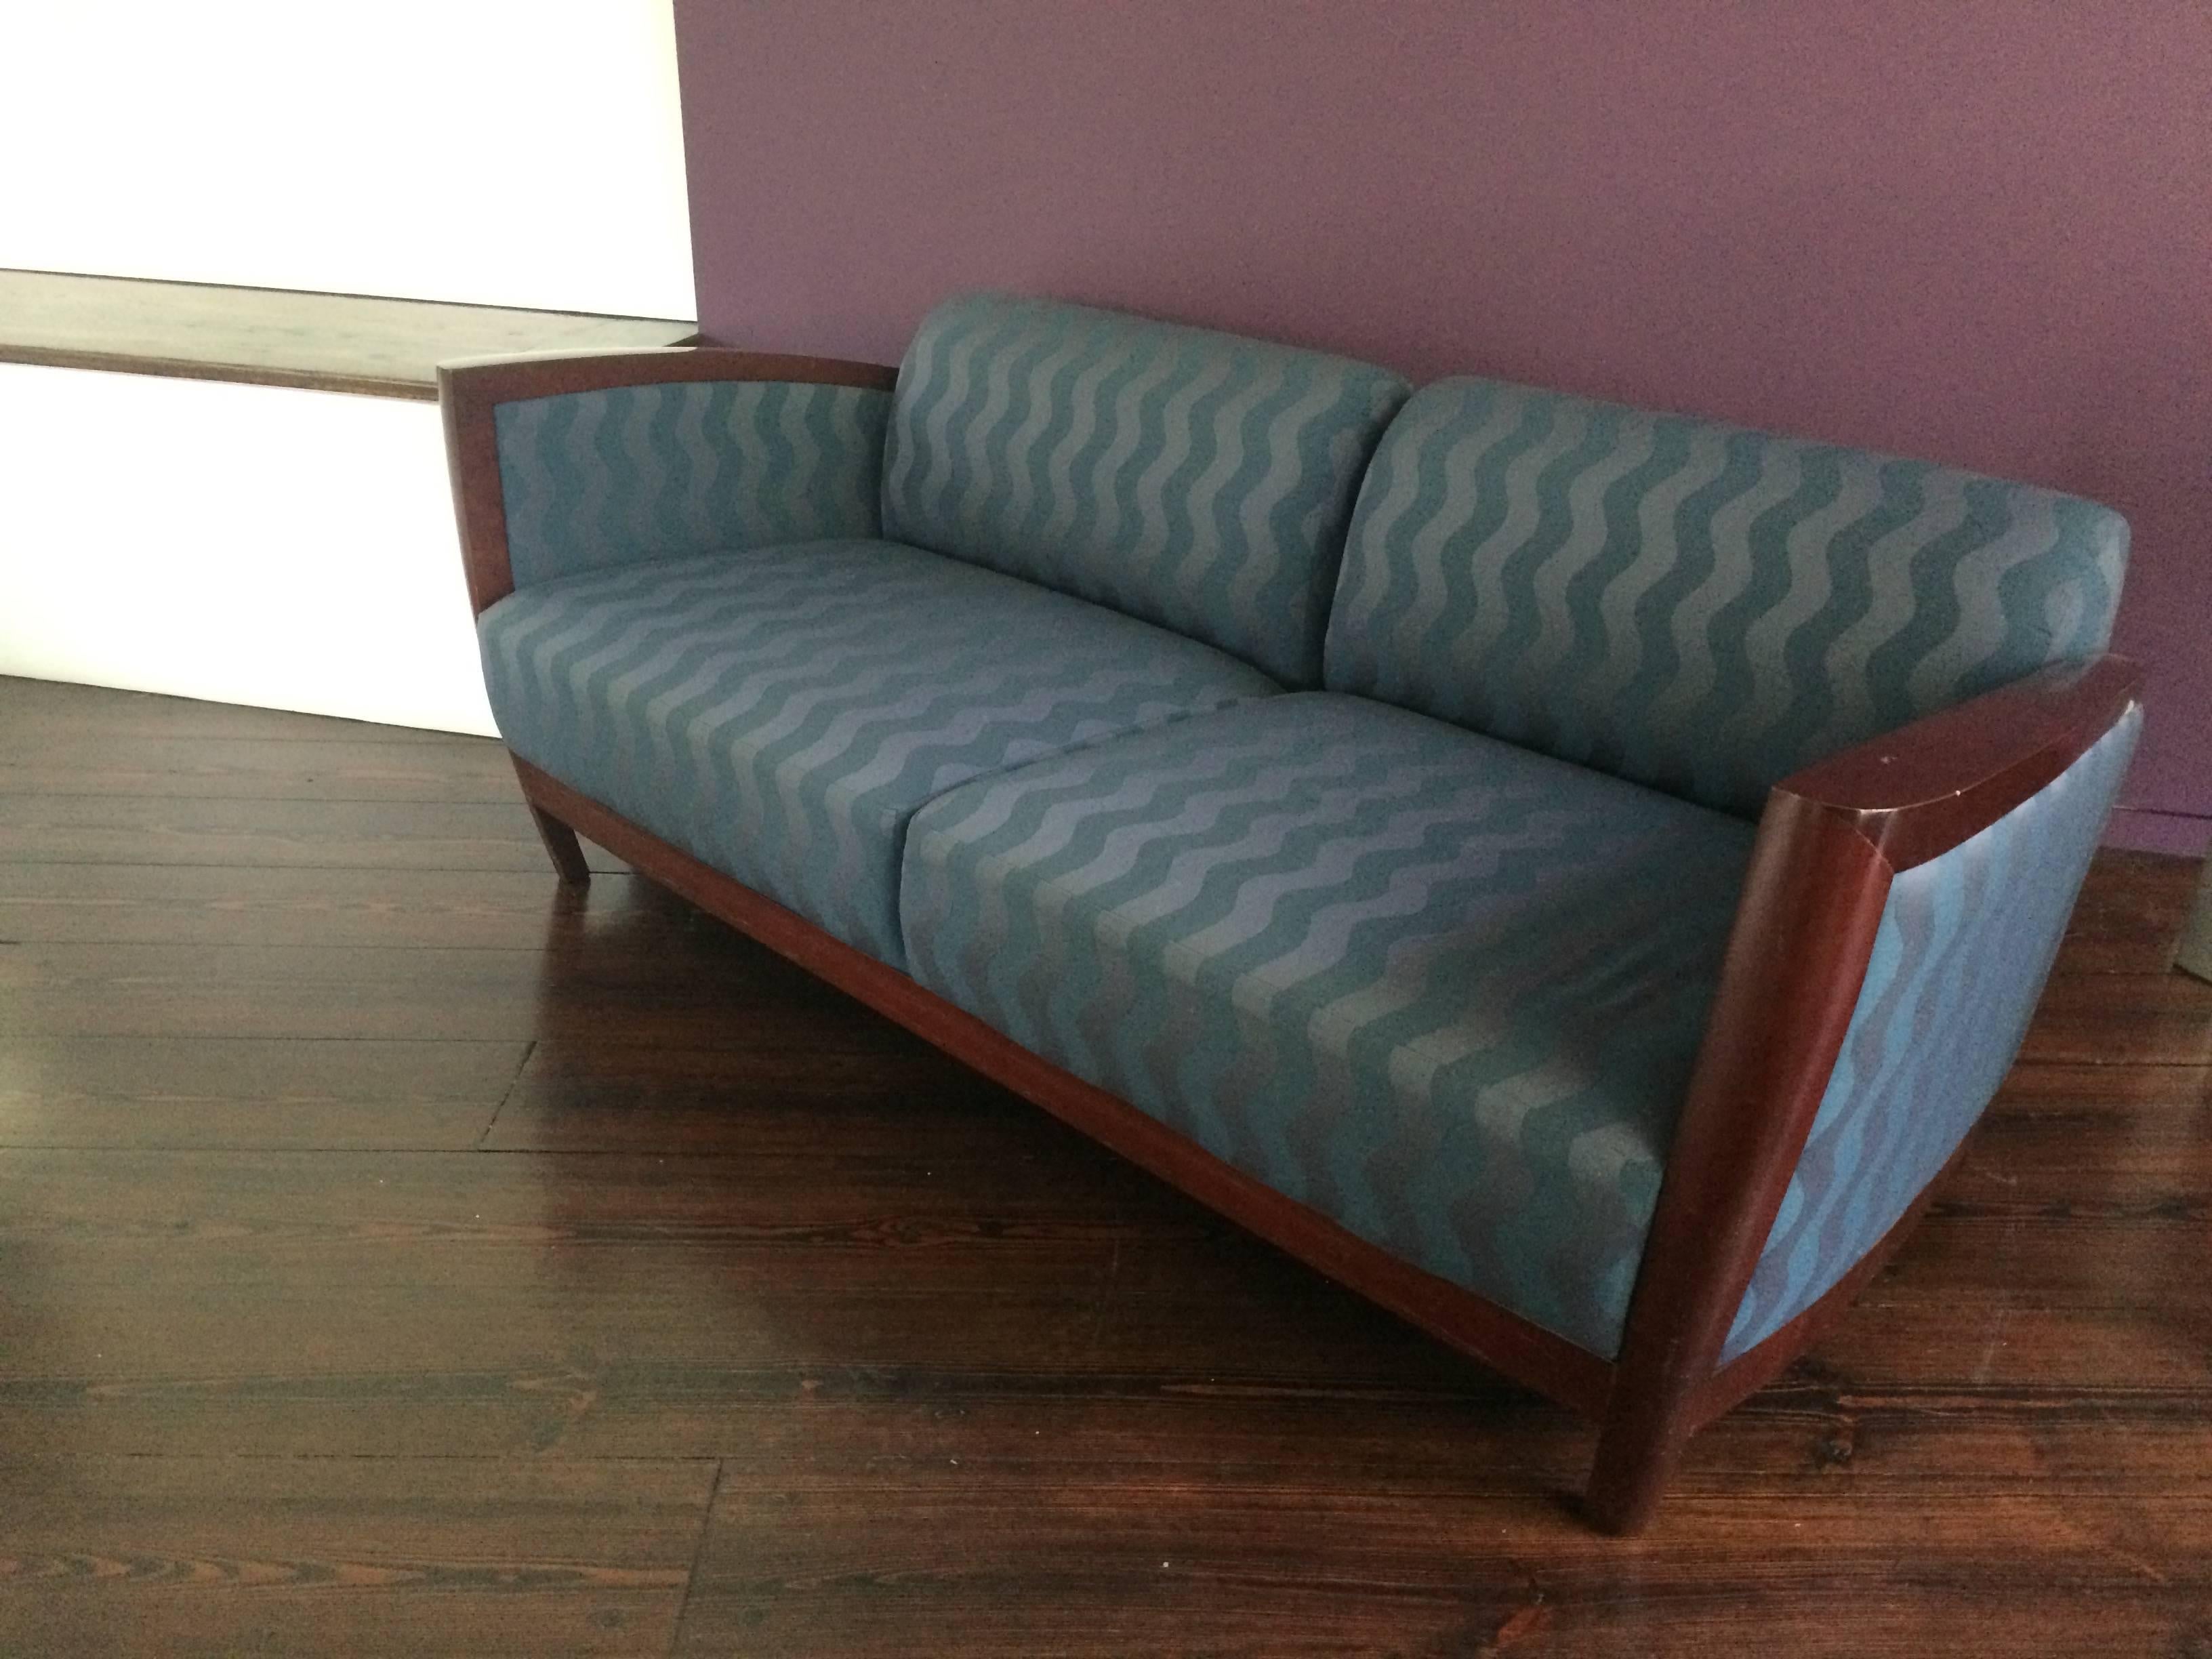 Wonderfully stylish mid-century modern sofa with an art deco silhouette, having super cool wave pattern upholstery in two shades of teal blue. Cushions are not removable.  
 By Kenneth Winslow, NYC.  Measures: Arm height 27, seat depth 25.